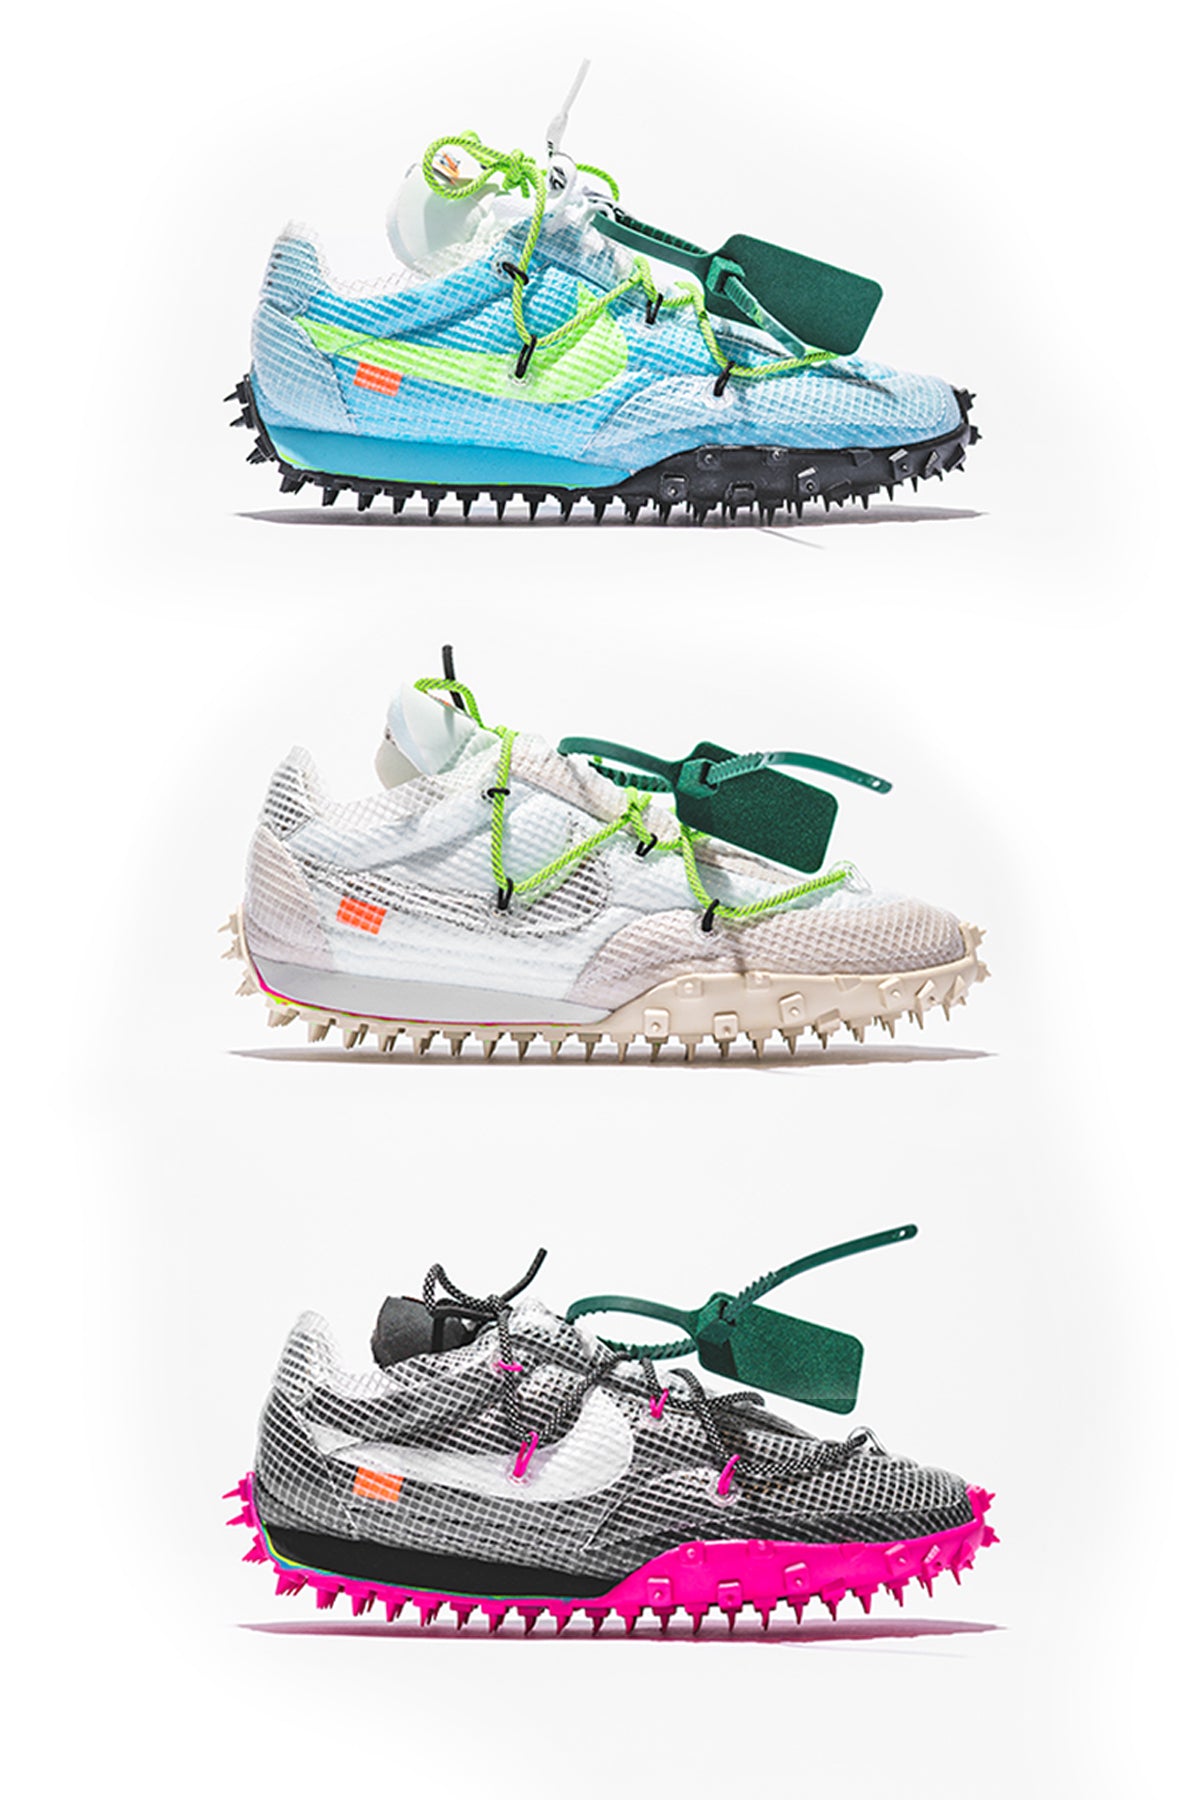 Nike x Off-White Waffle Racer: The Next Track and Field Themed Launch